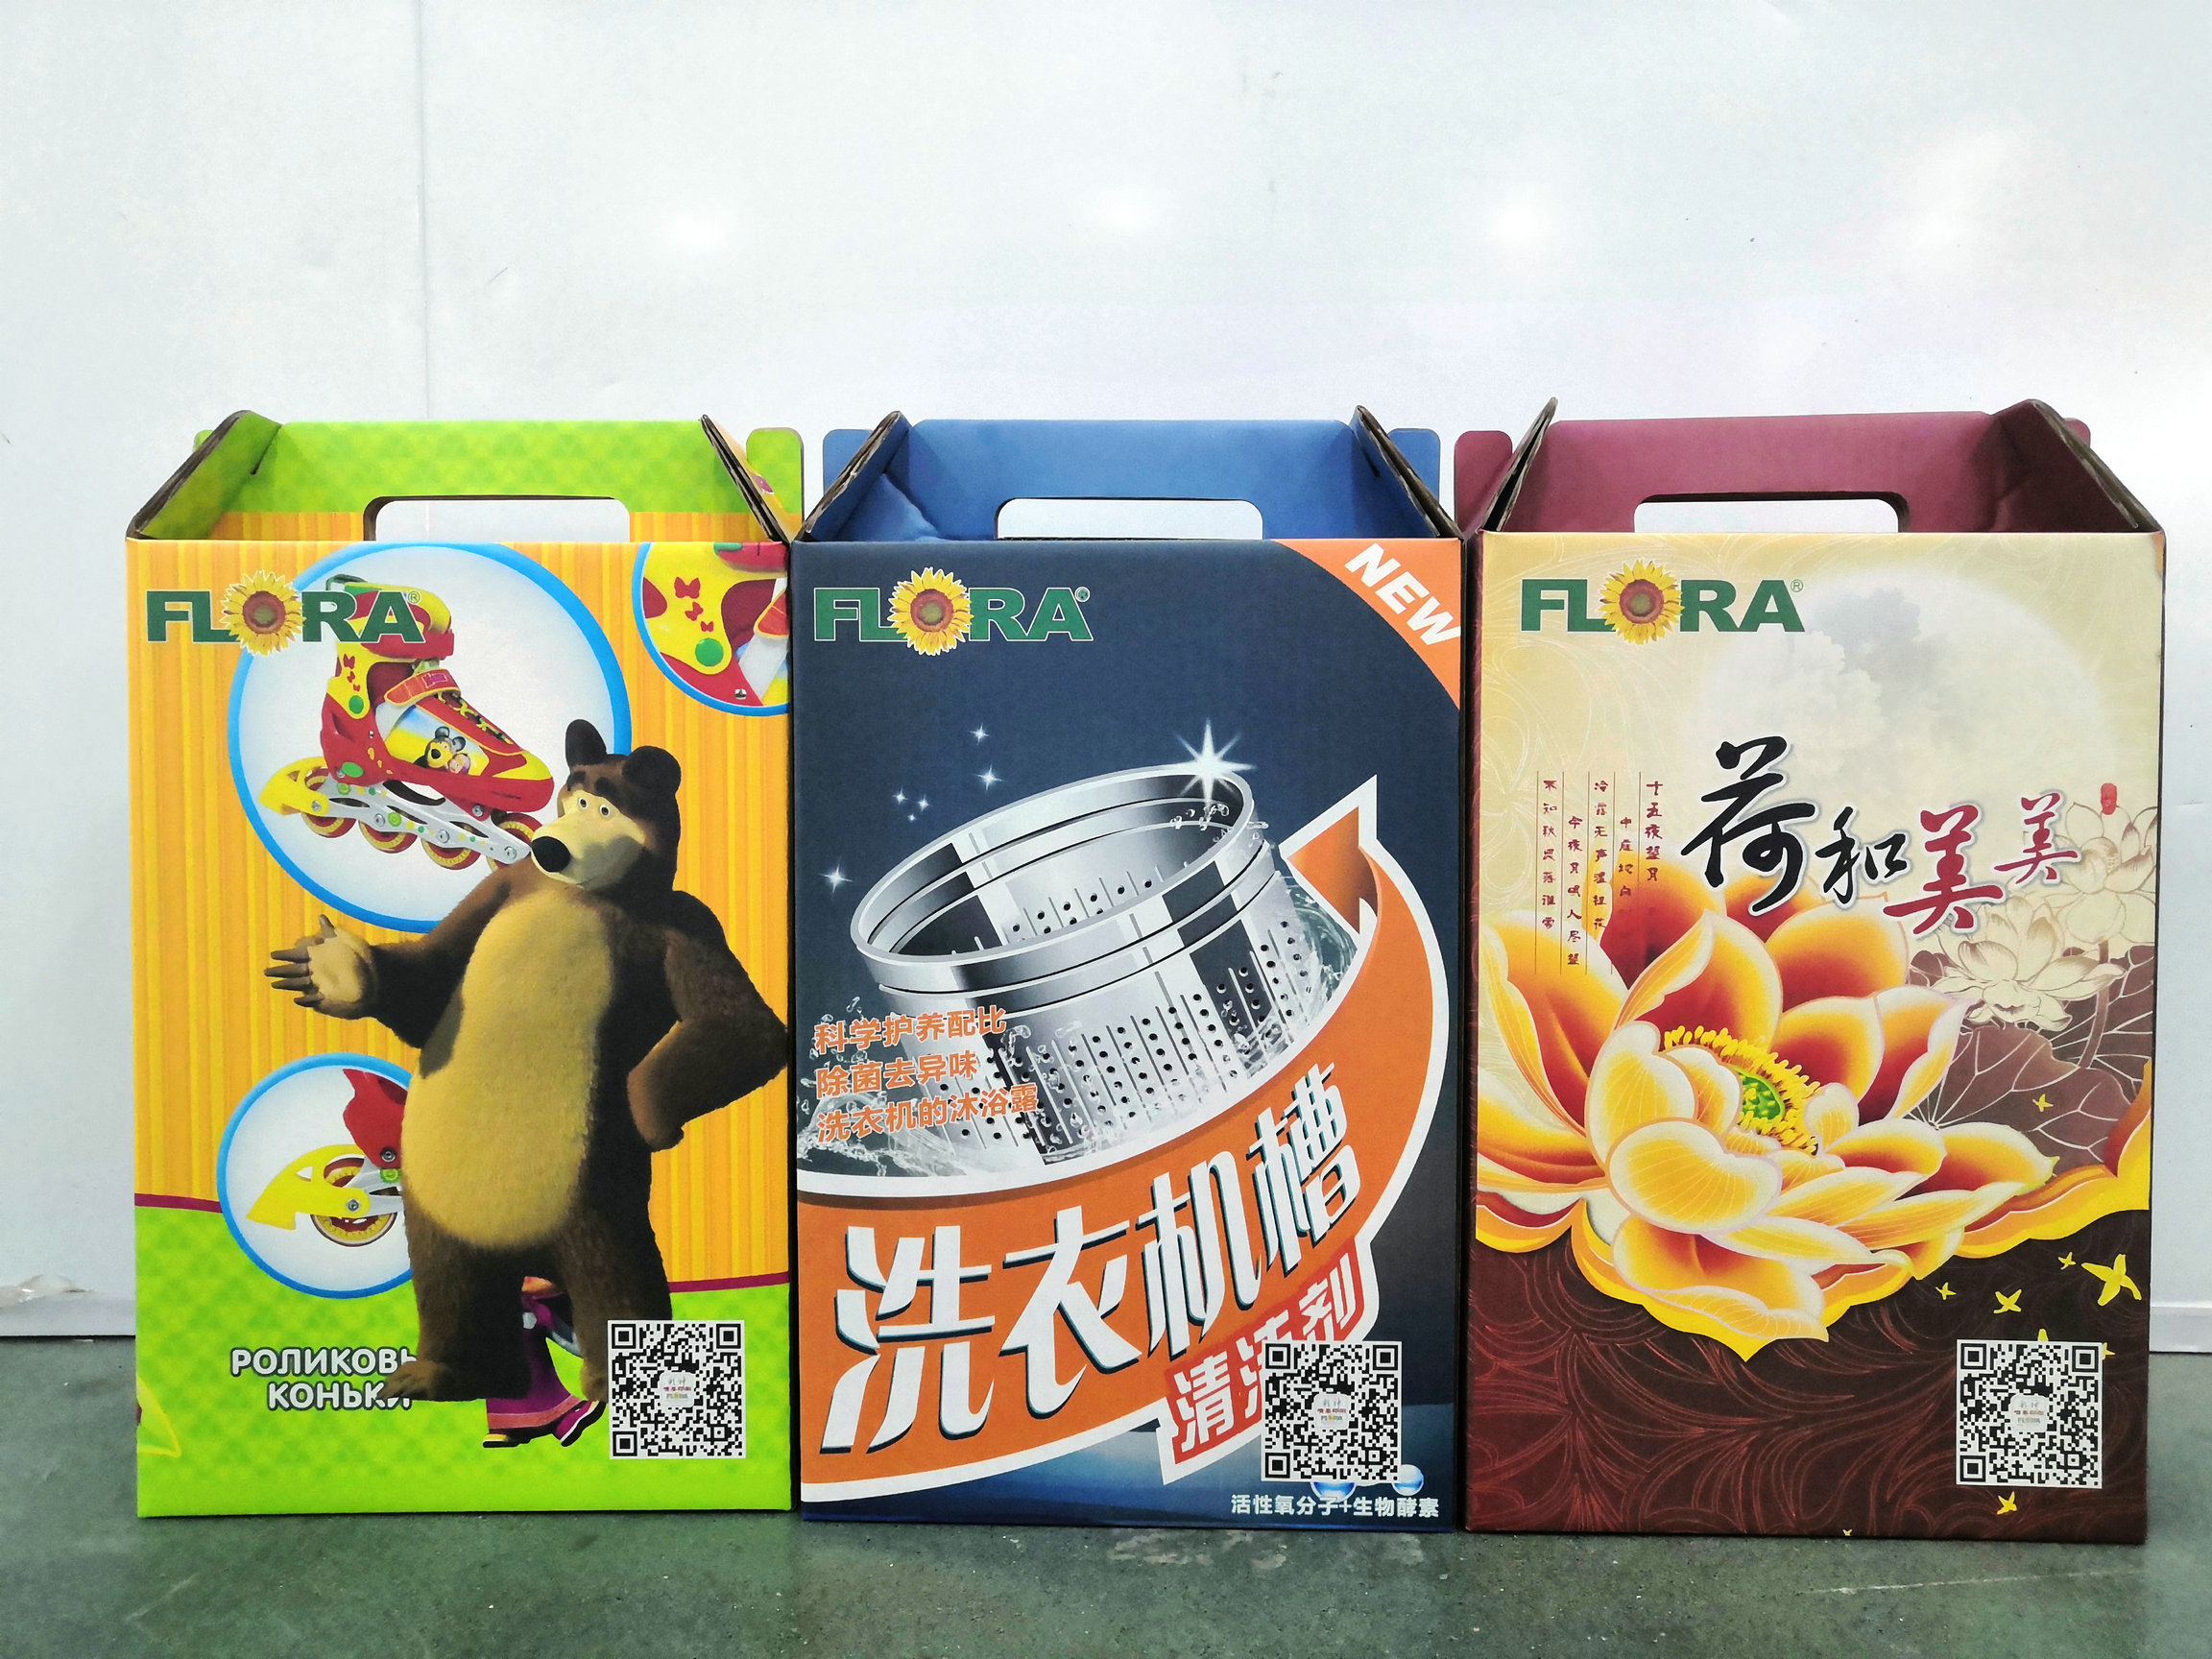 Industry Observation|Digital printing activates new forces in corrugated packaging